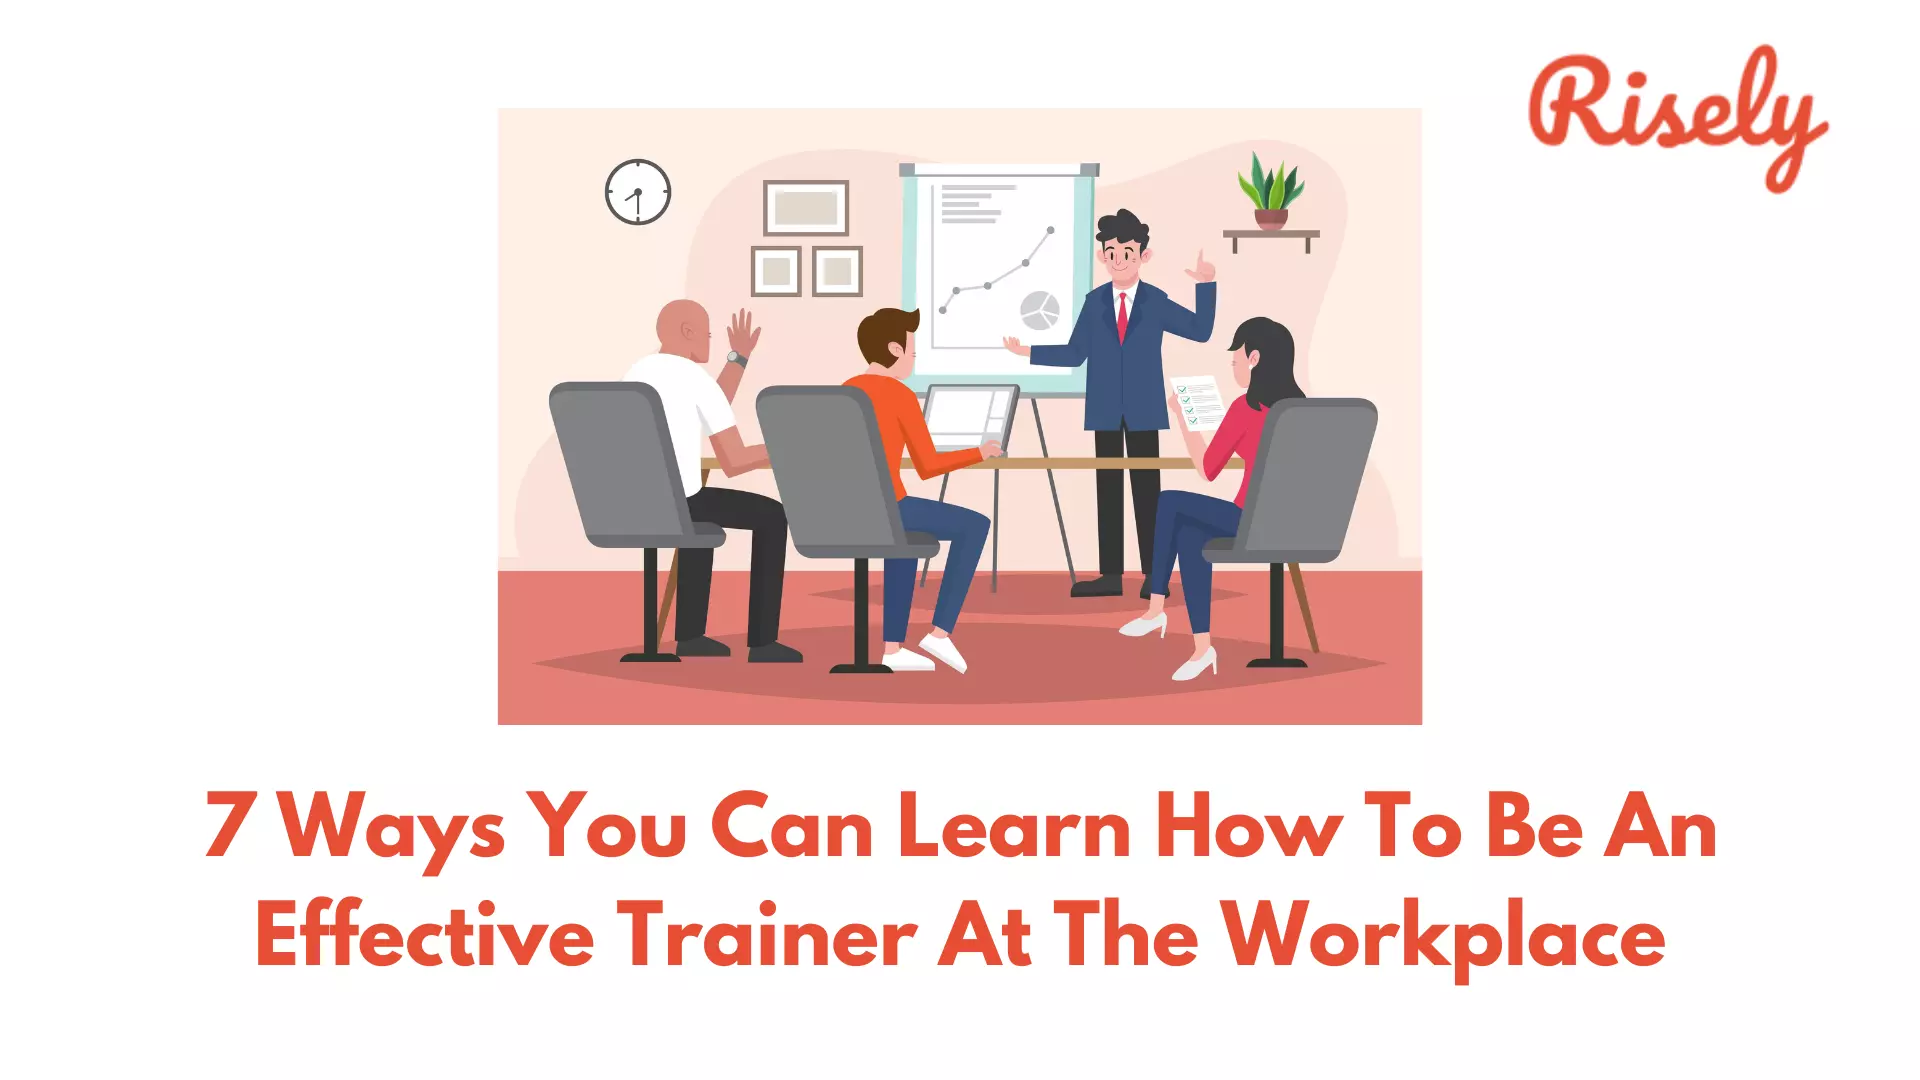 7 Ways You Can Learn How To Be An Effective Trainer At The Workplace